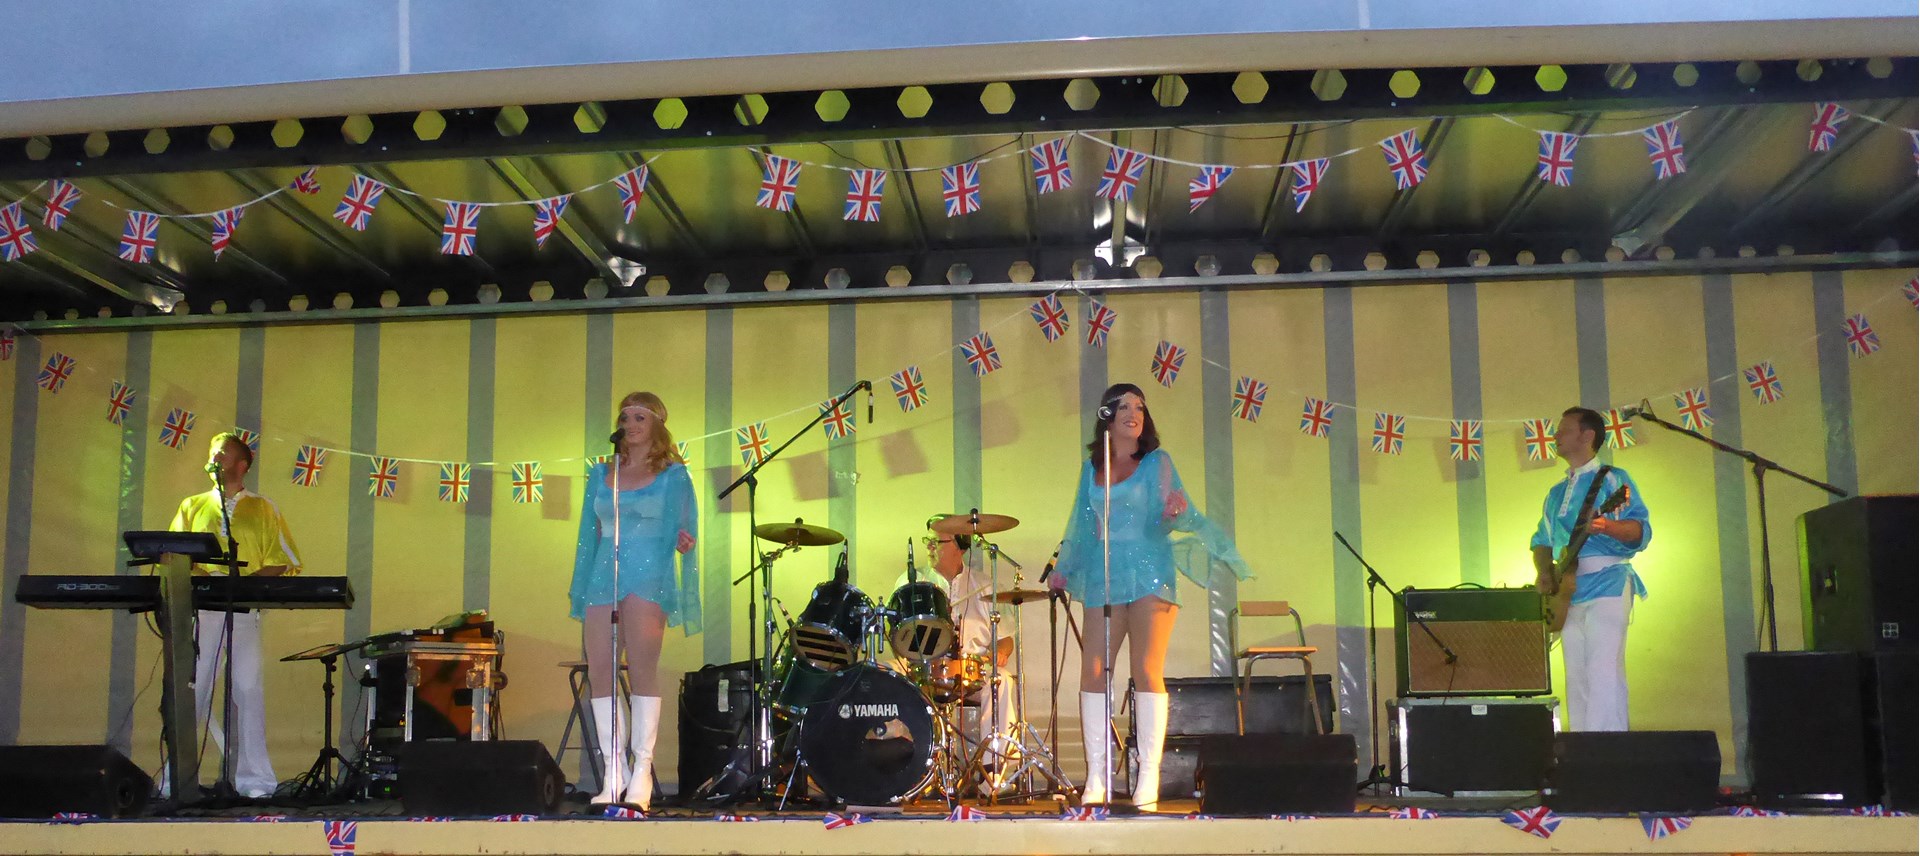 Bourton-on-the-Water Parish Council Abba Concert